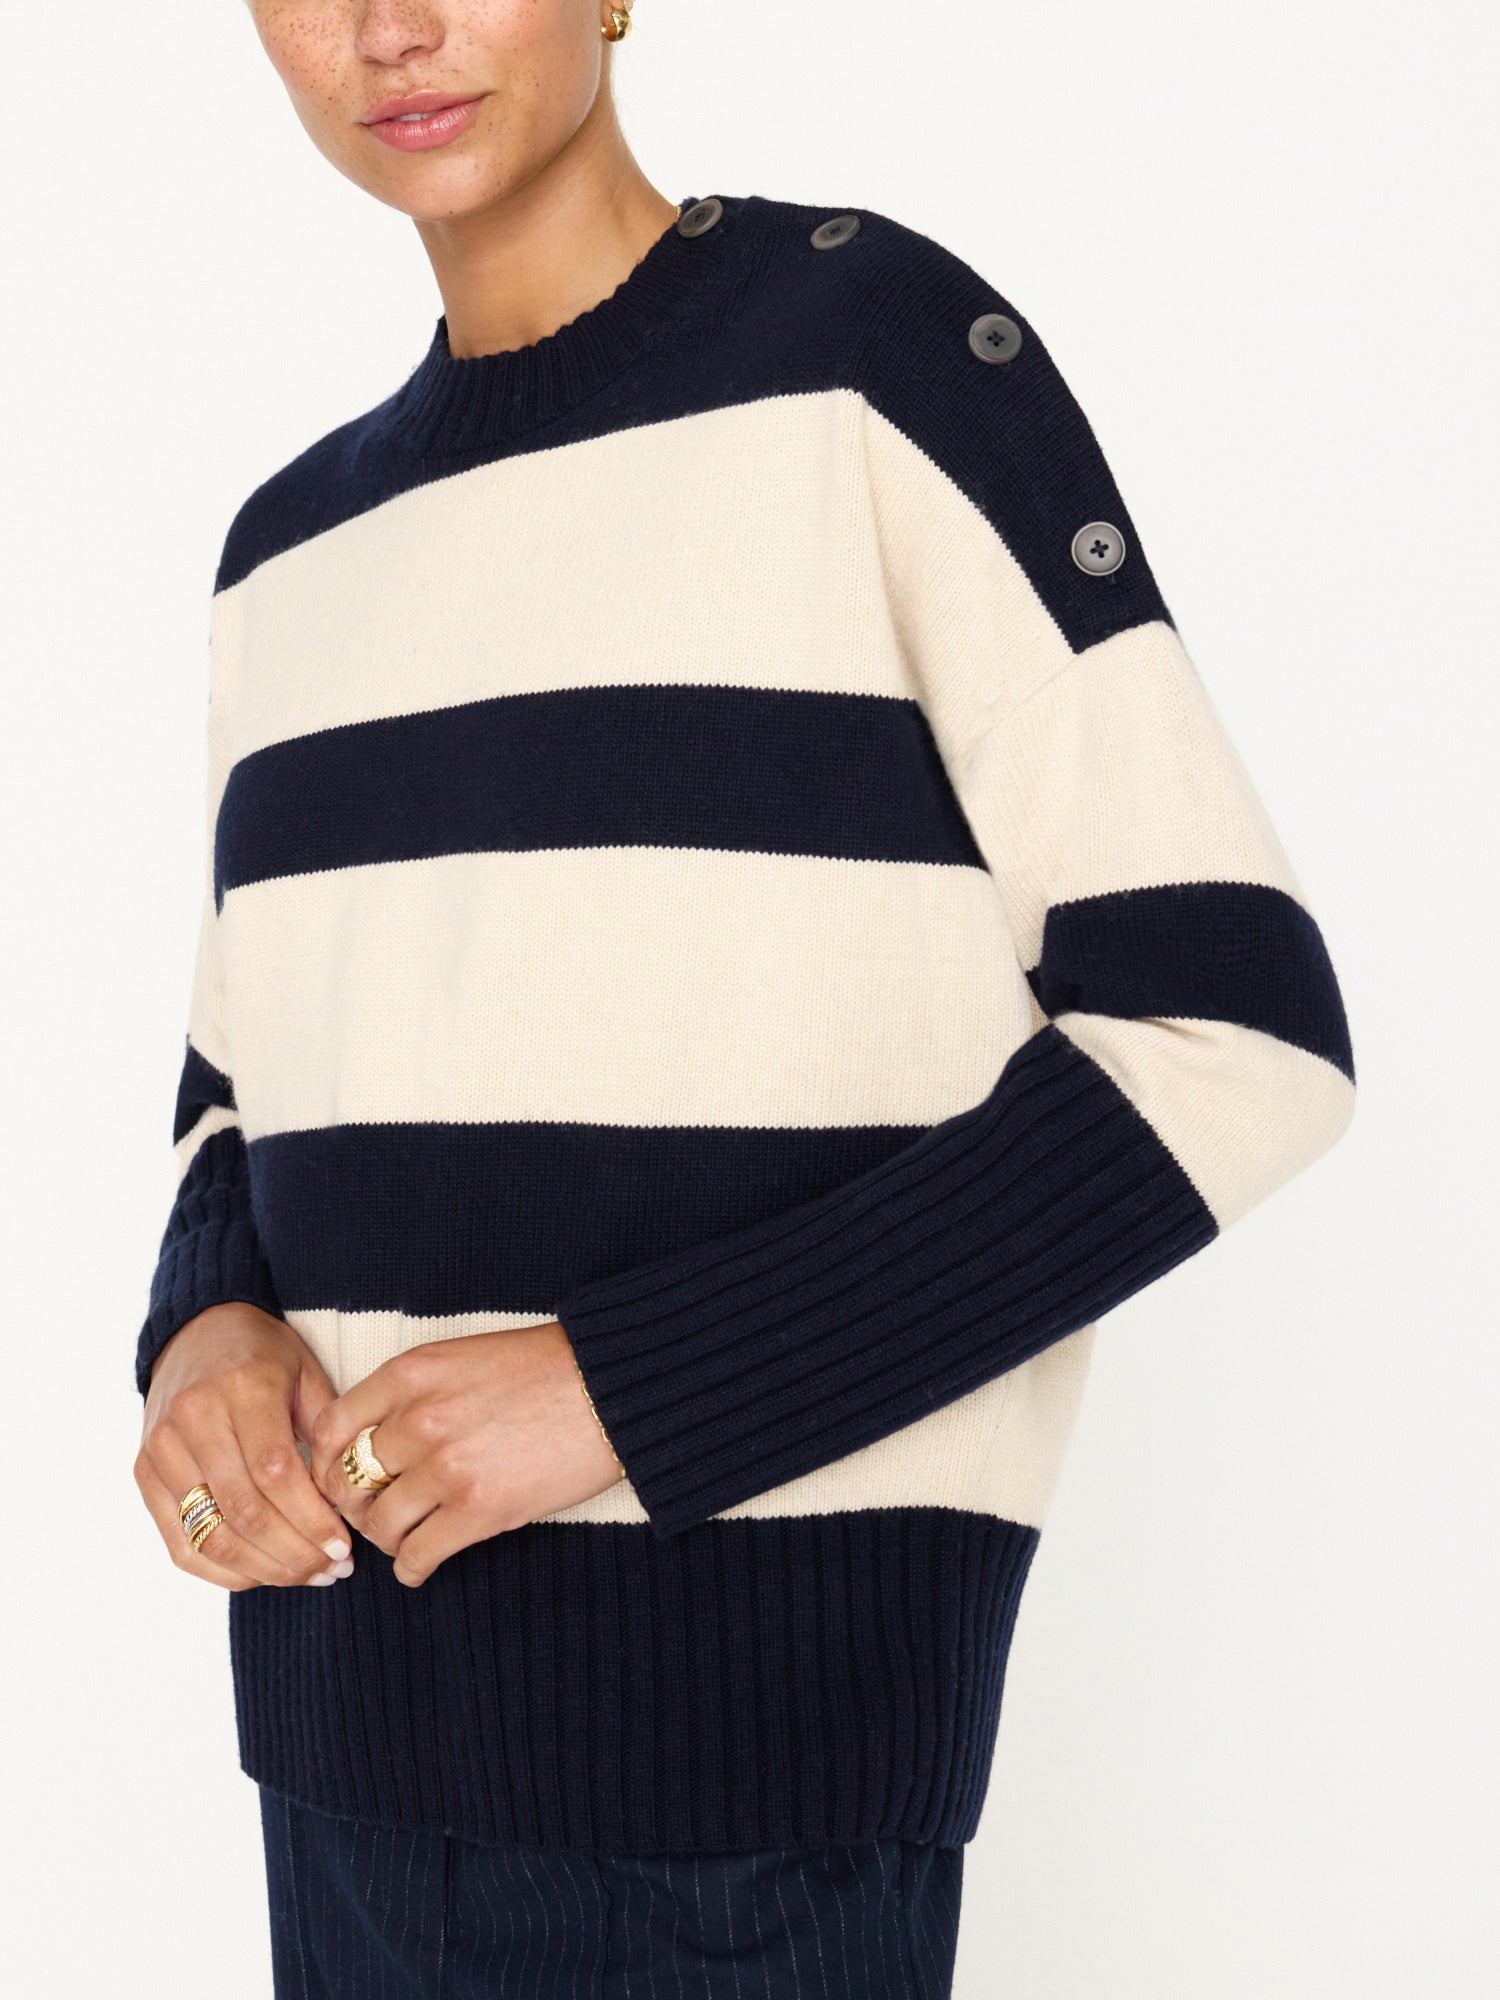 Cy navy and beige stripe crewneck sweater front view 2